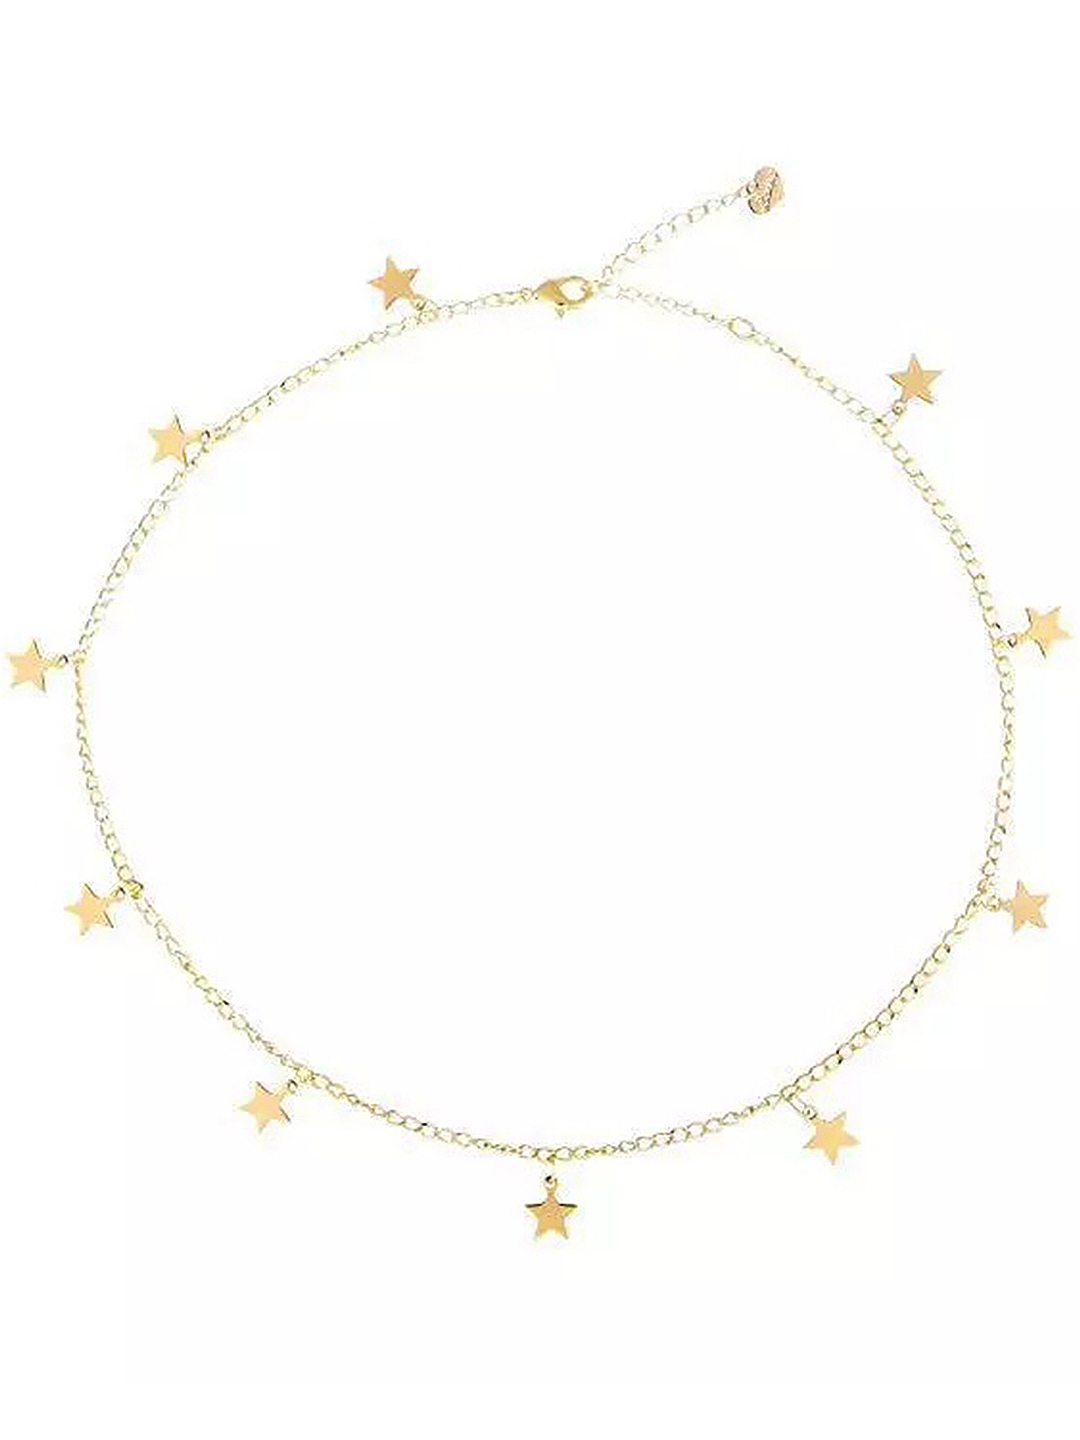 Stunning Gold Plated Stars Pendant Necklace